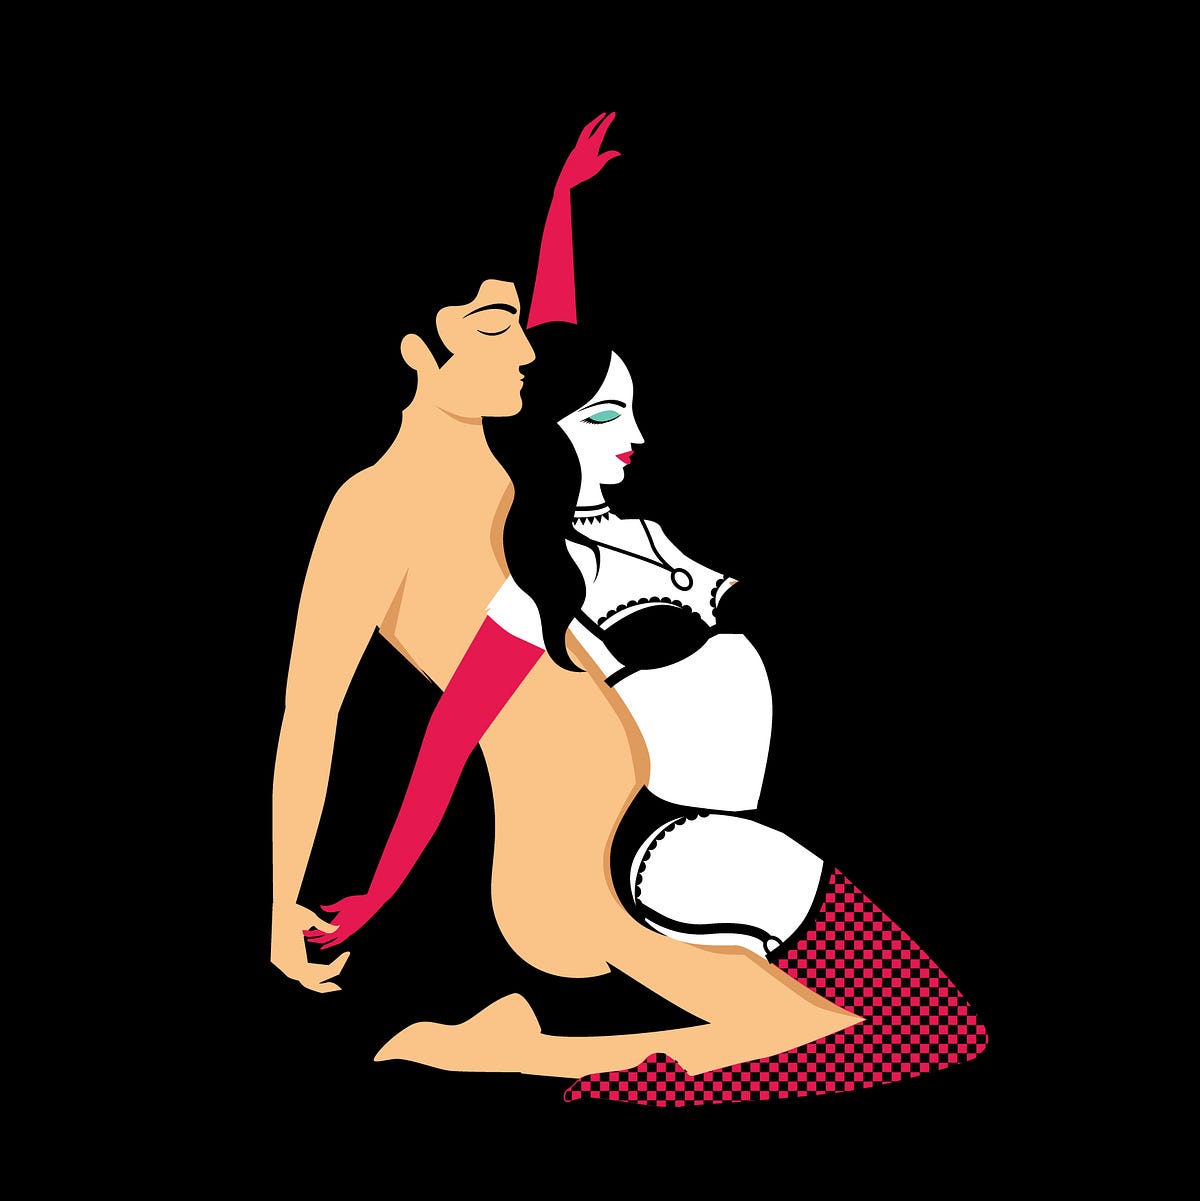 Love Advice from the Kama Sutra image